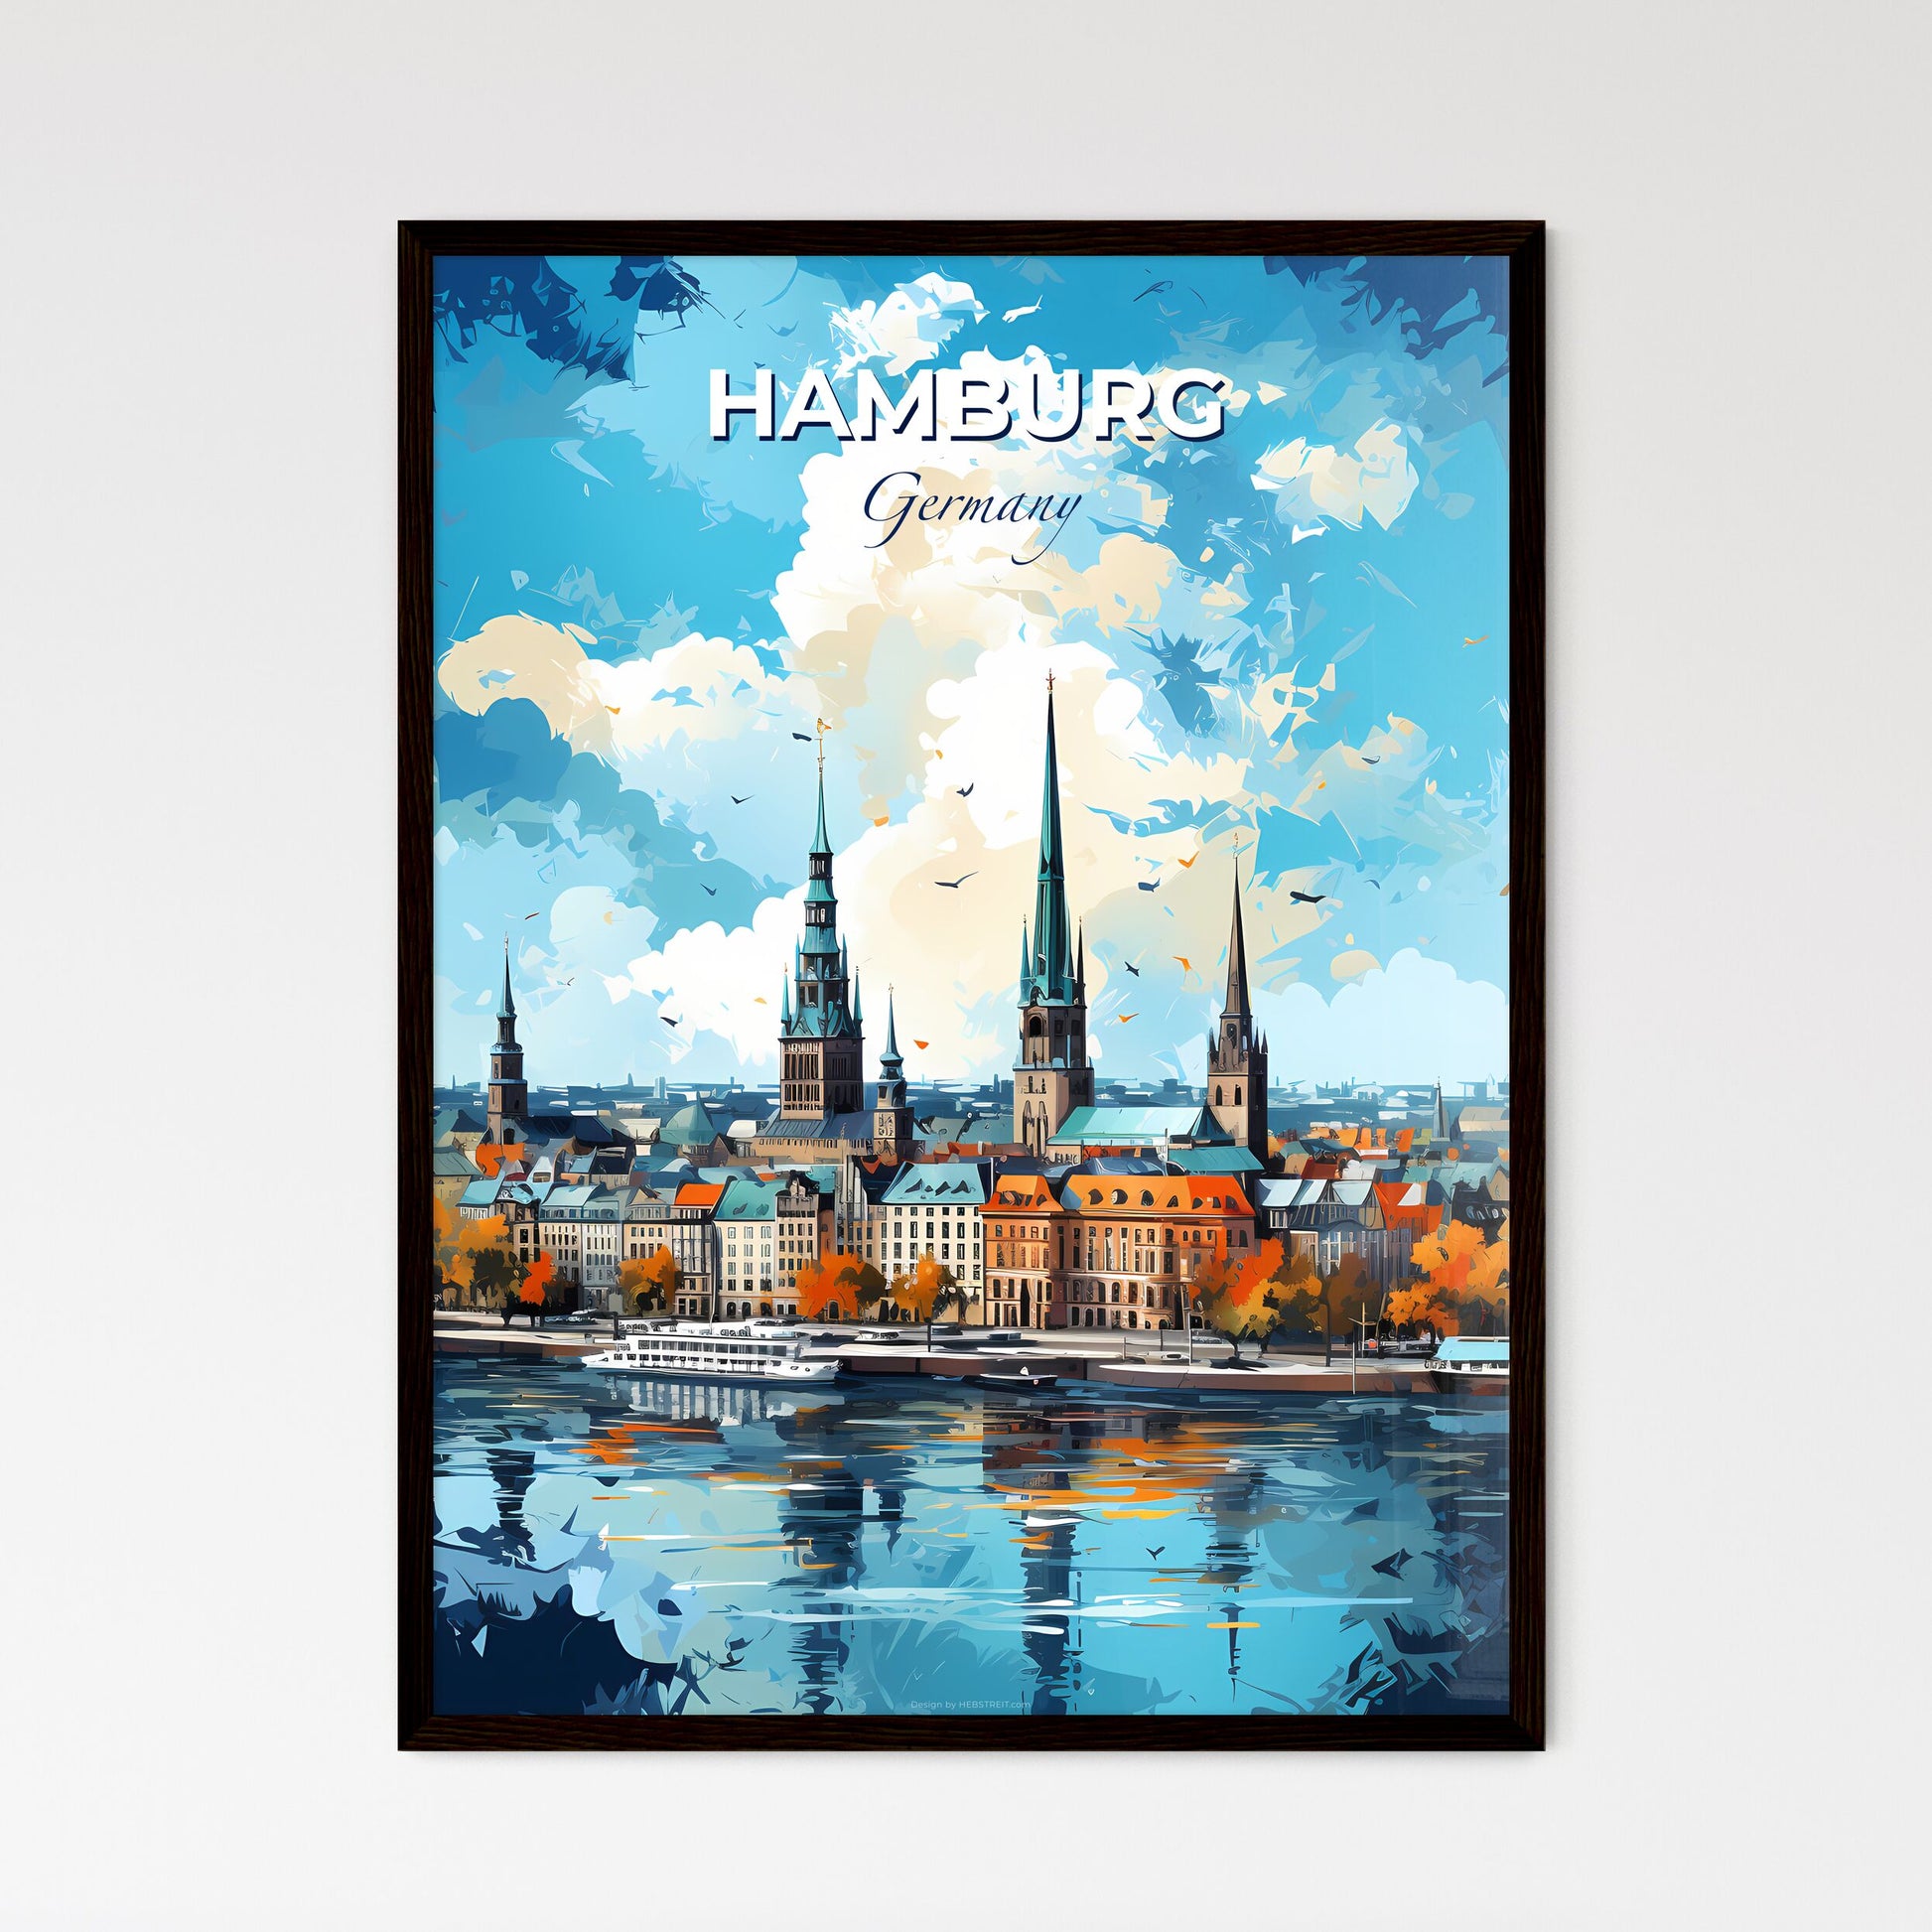 Hamburg Germany Skyline - A City With Towers And Trees By Water - Customizable Travel Gift Default Title